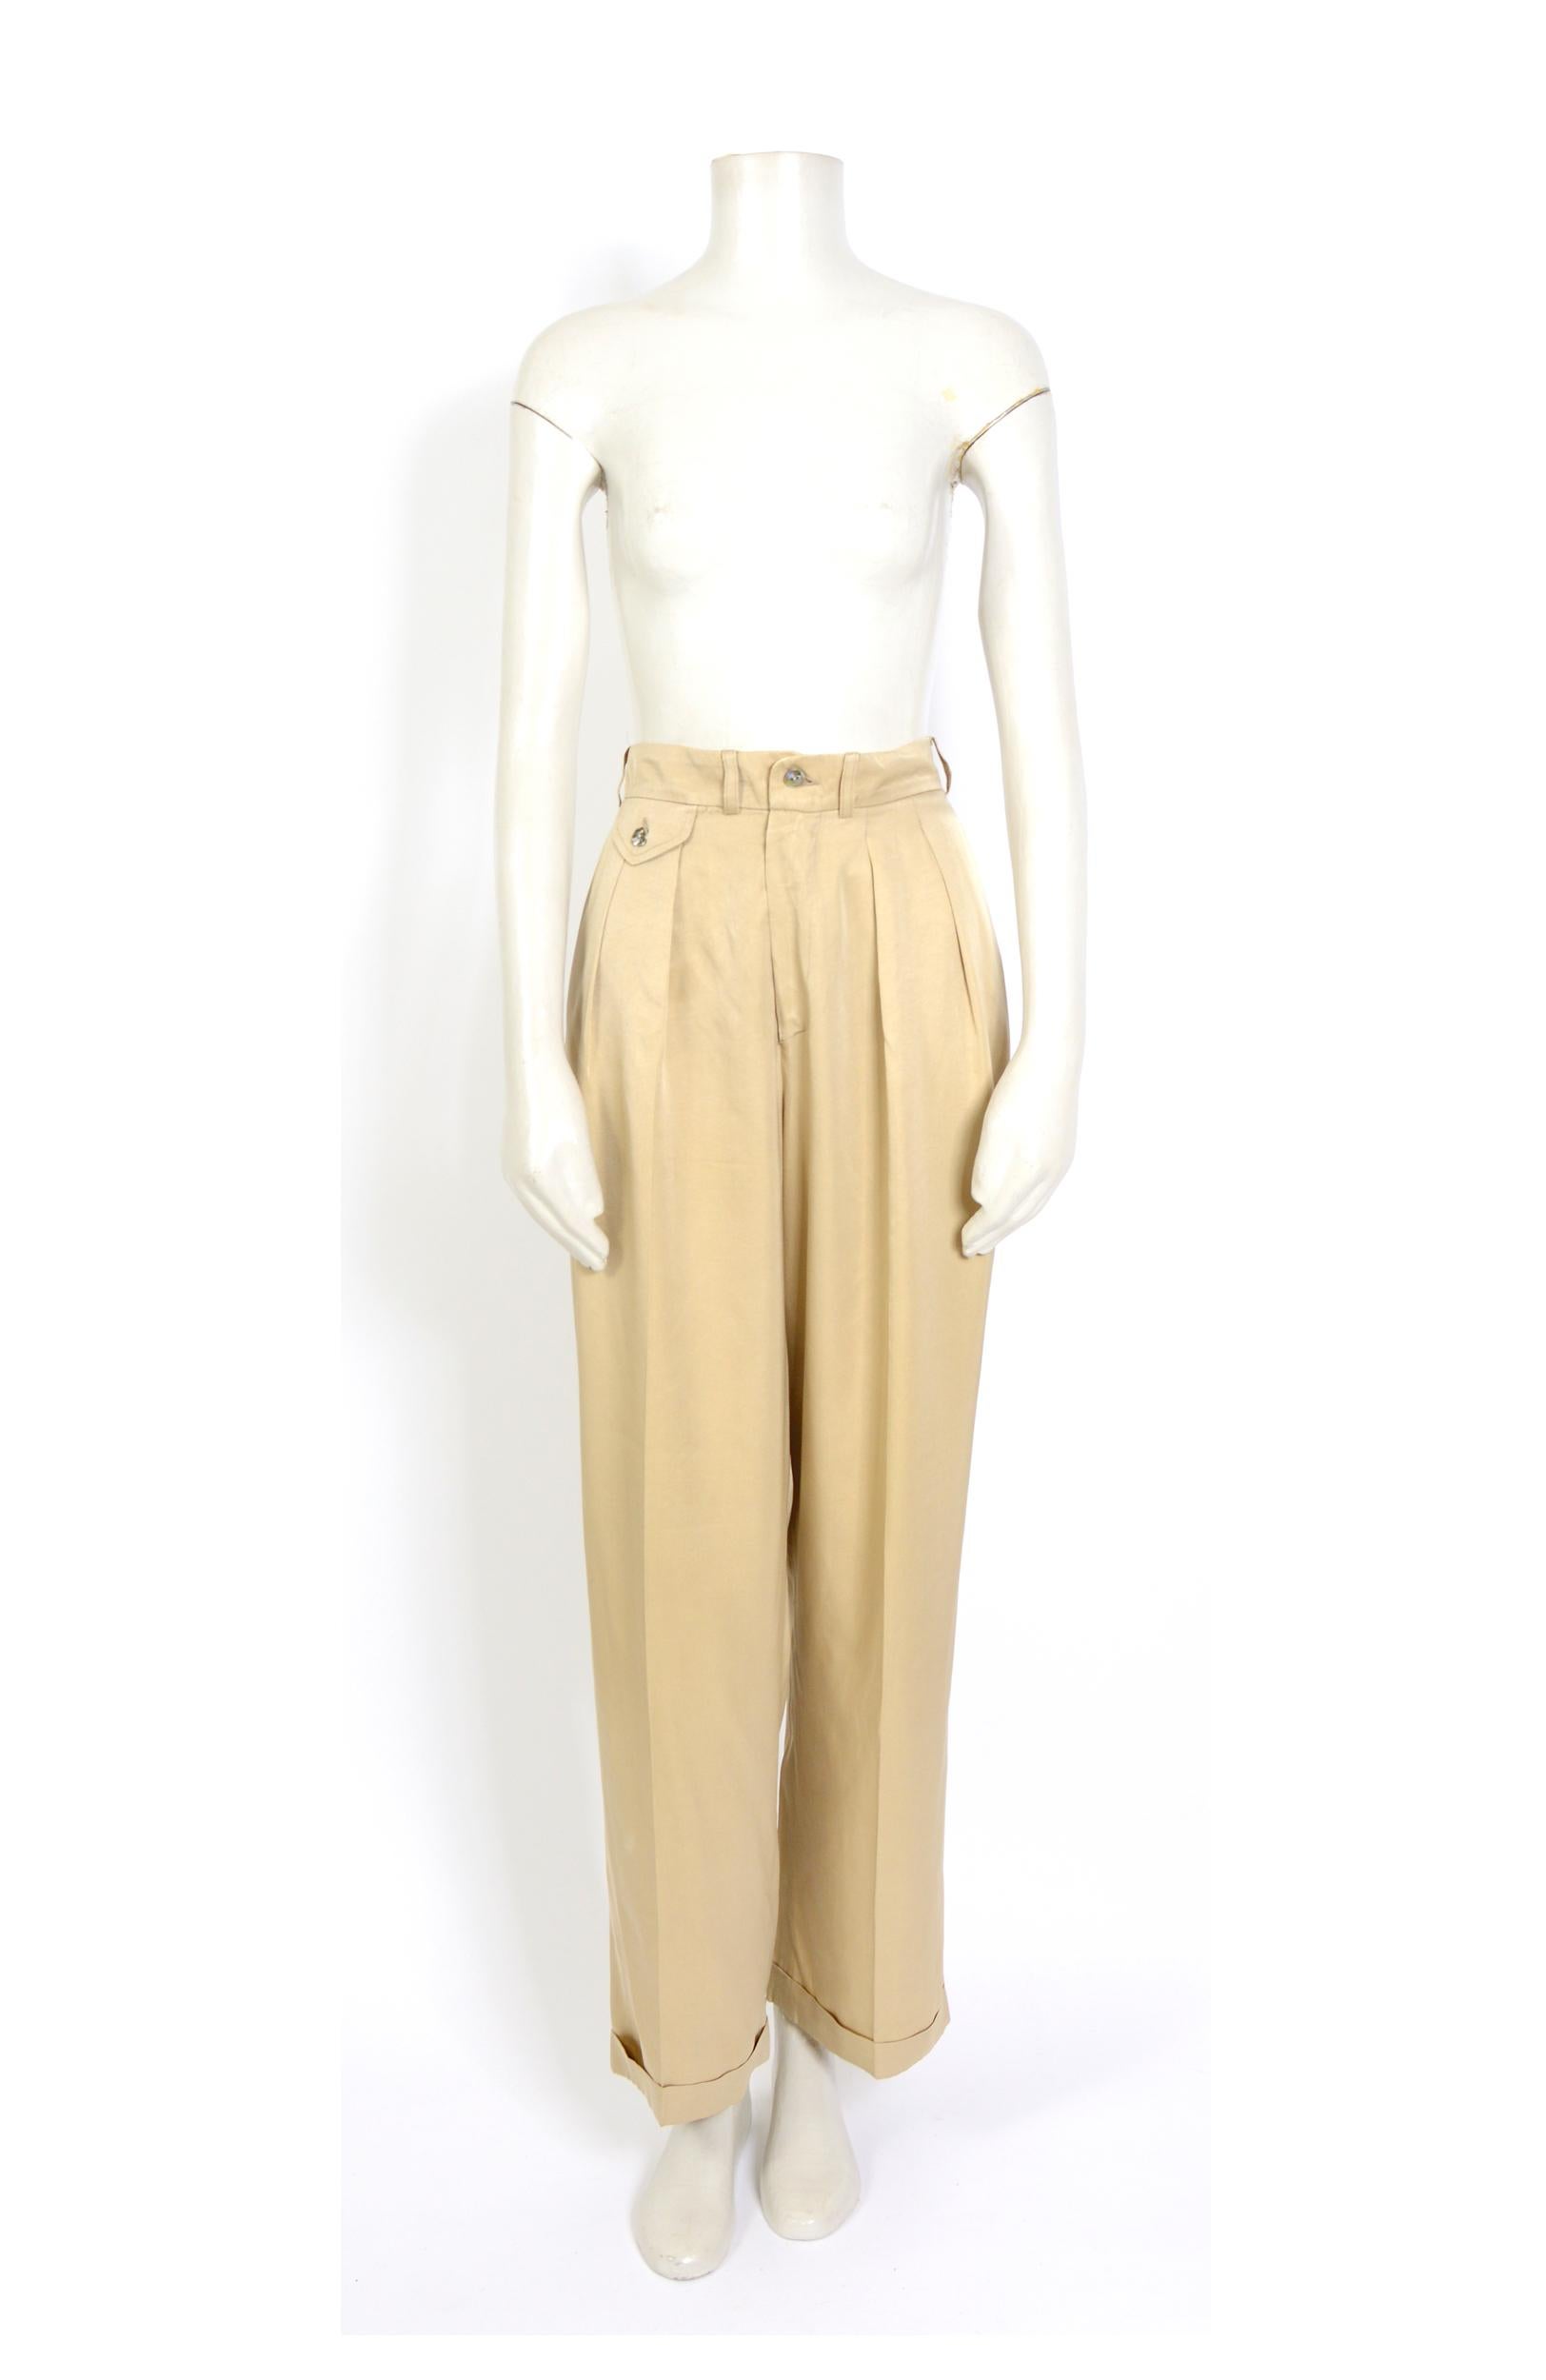 Beautiful Rifat Ozbek vintage silk blend front pleated elegant Great Garbo or Garçon style trousers.
Size USA 10 - GB 12 - French 40 - Italian 44
Made in Italy
Measurements are taken flat:
Waist 13,5inch/34cm(x2) - Rise 15,5inch/39,5cm - Total